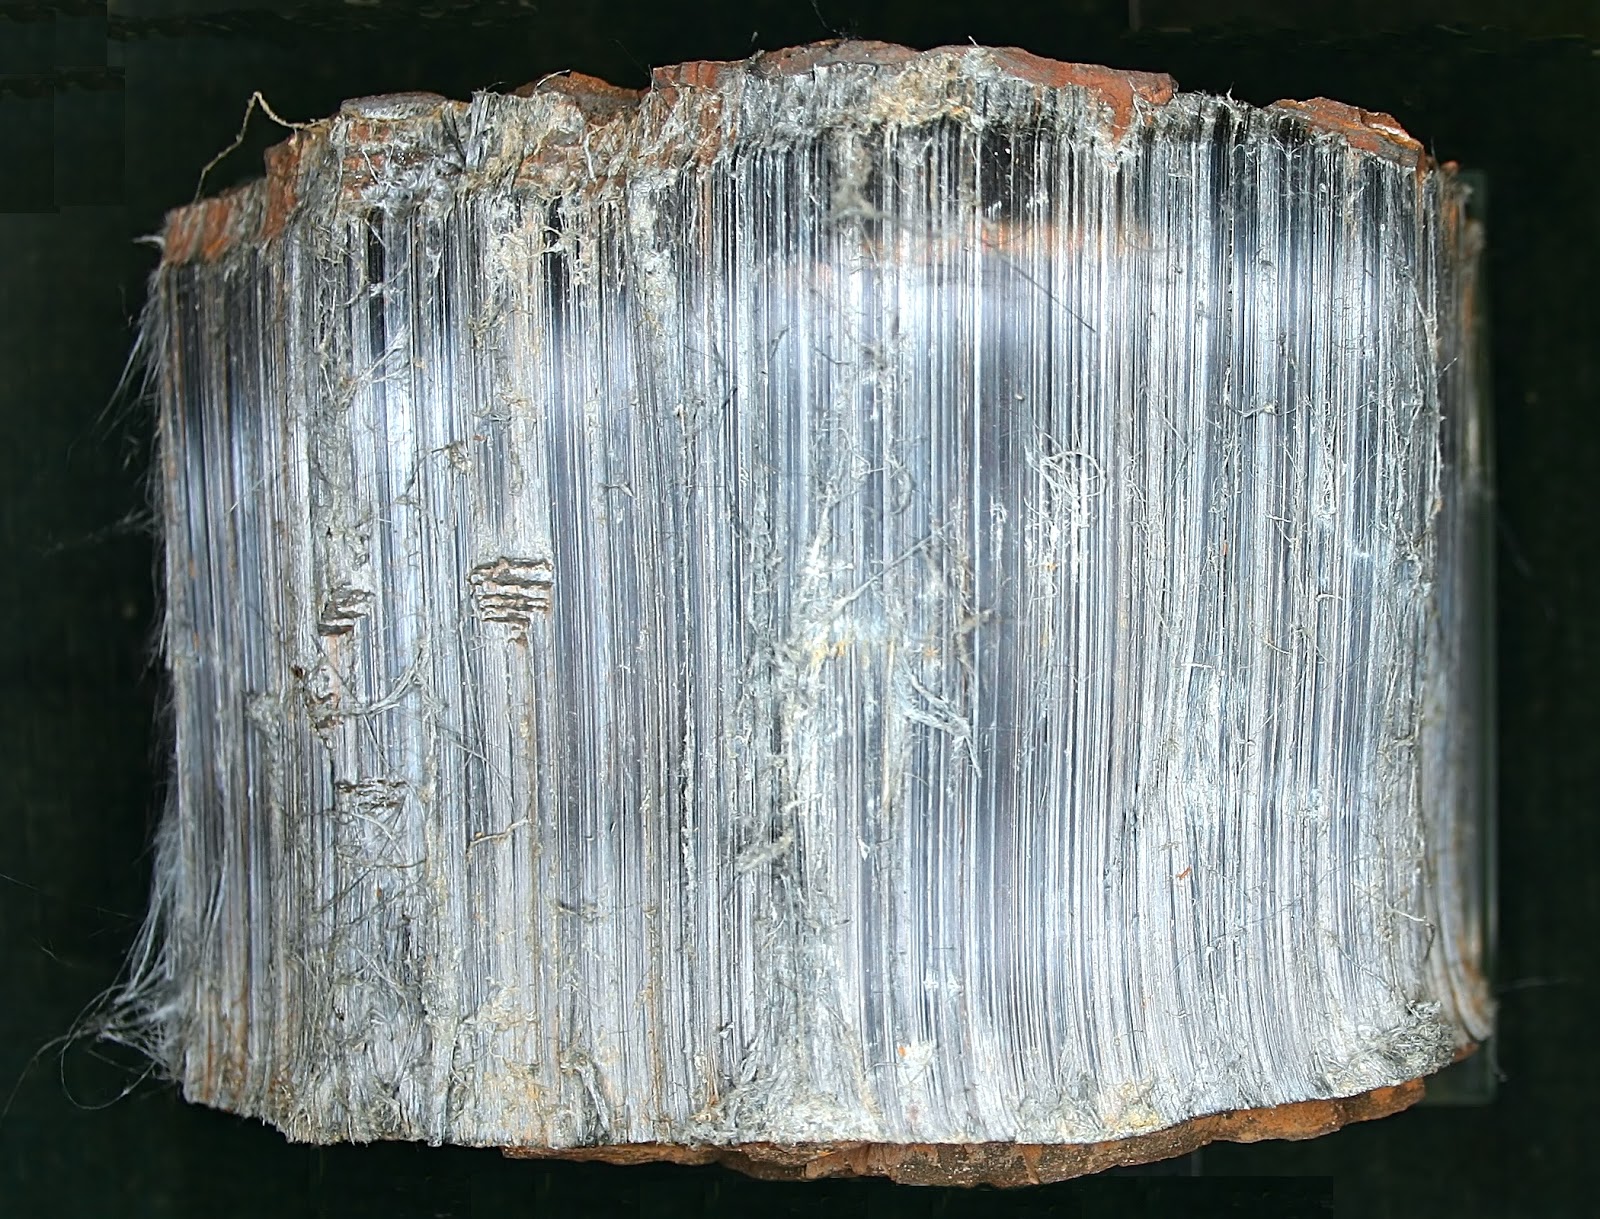 The 9 Deadliest Minerals We’ve Ever Mined